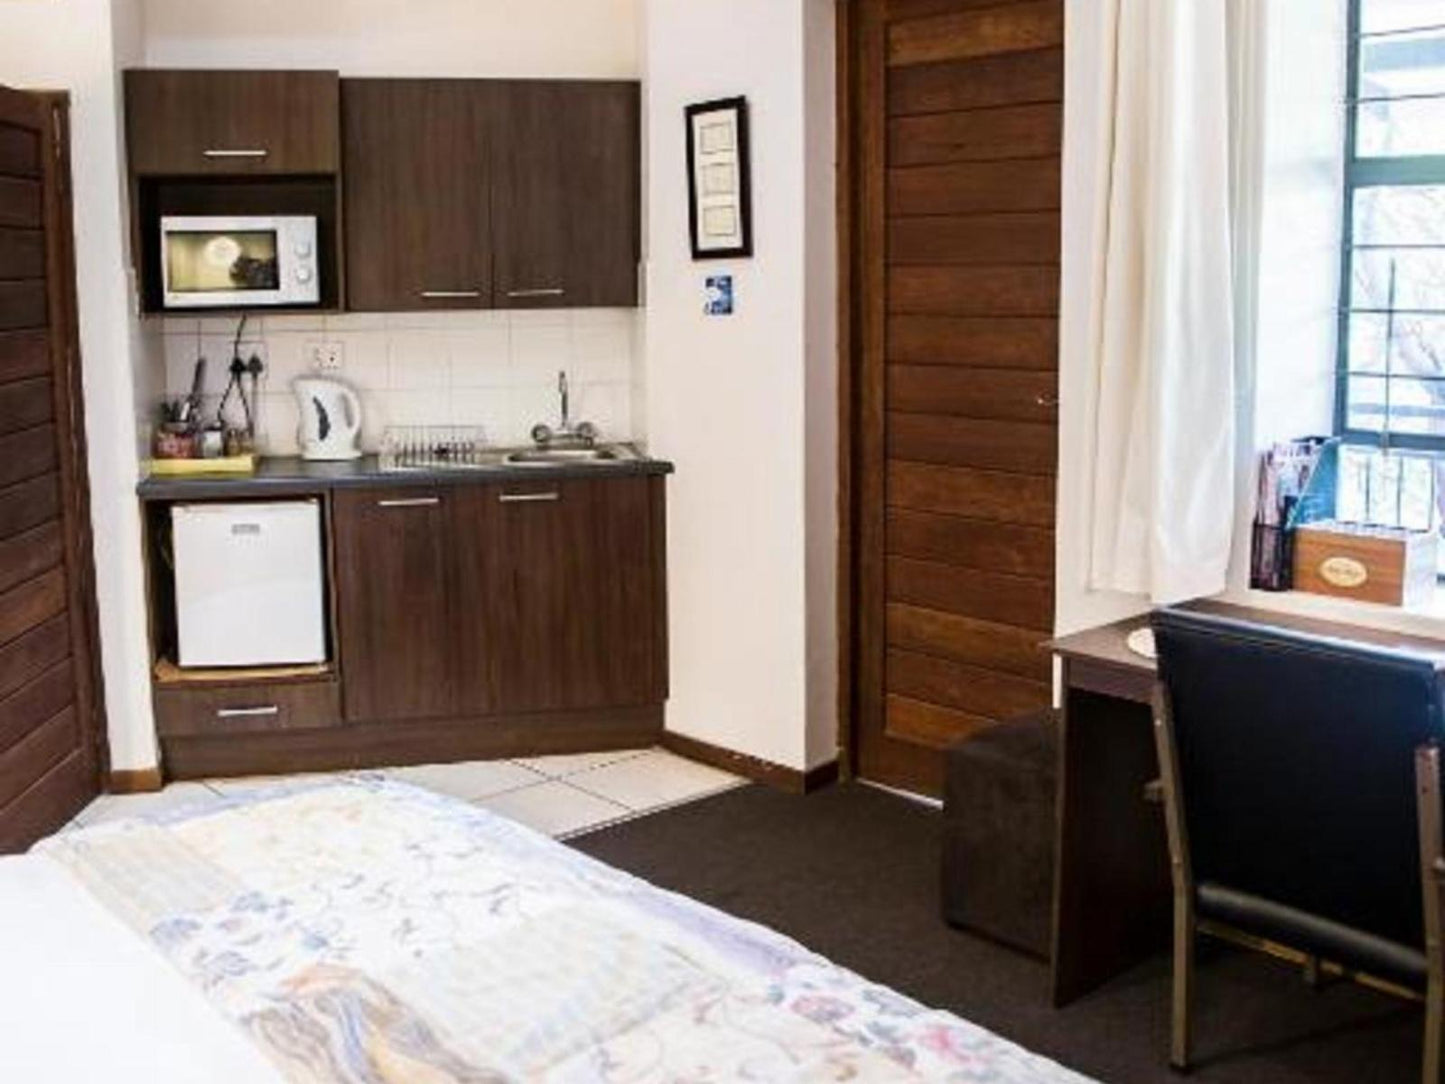 Deluxe Double or Twin Room @ Ons Dorpshuis 1, 3 And 4